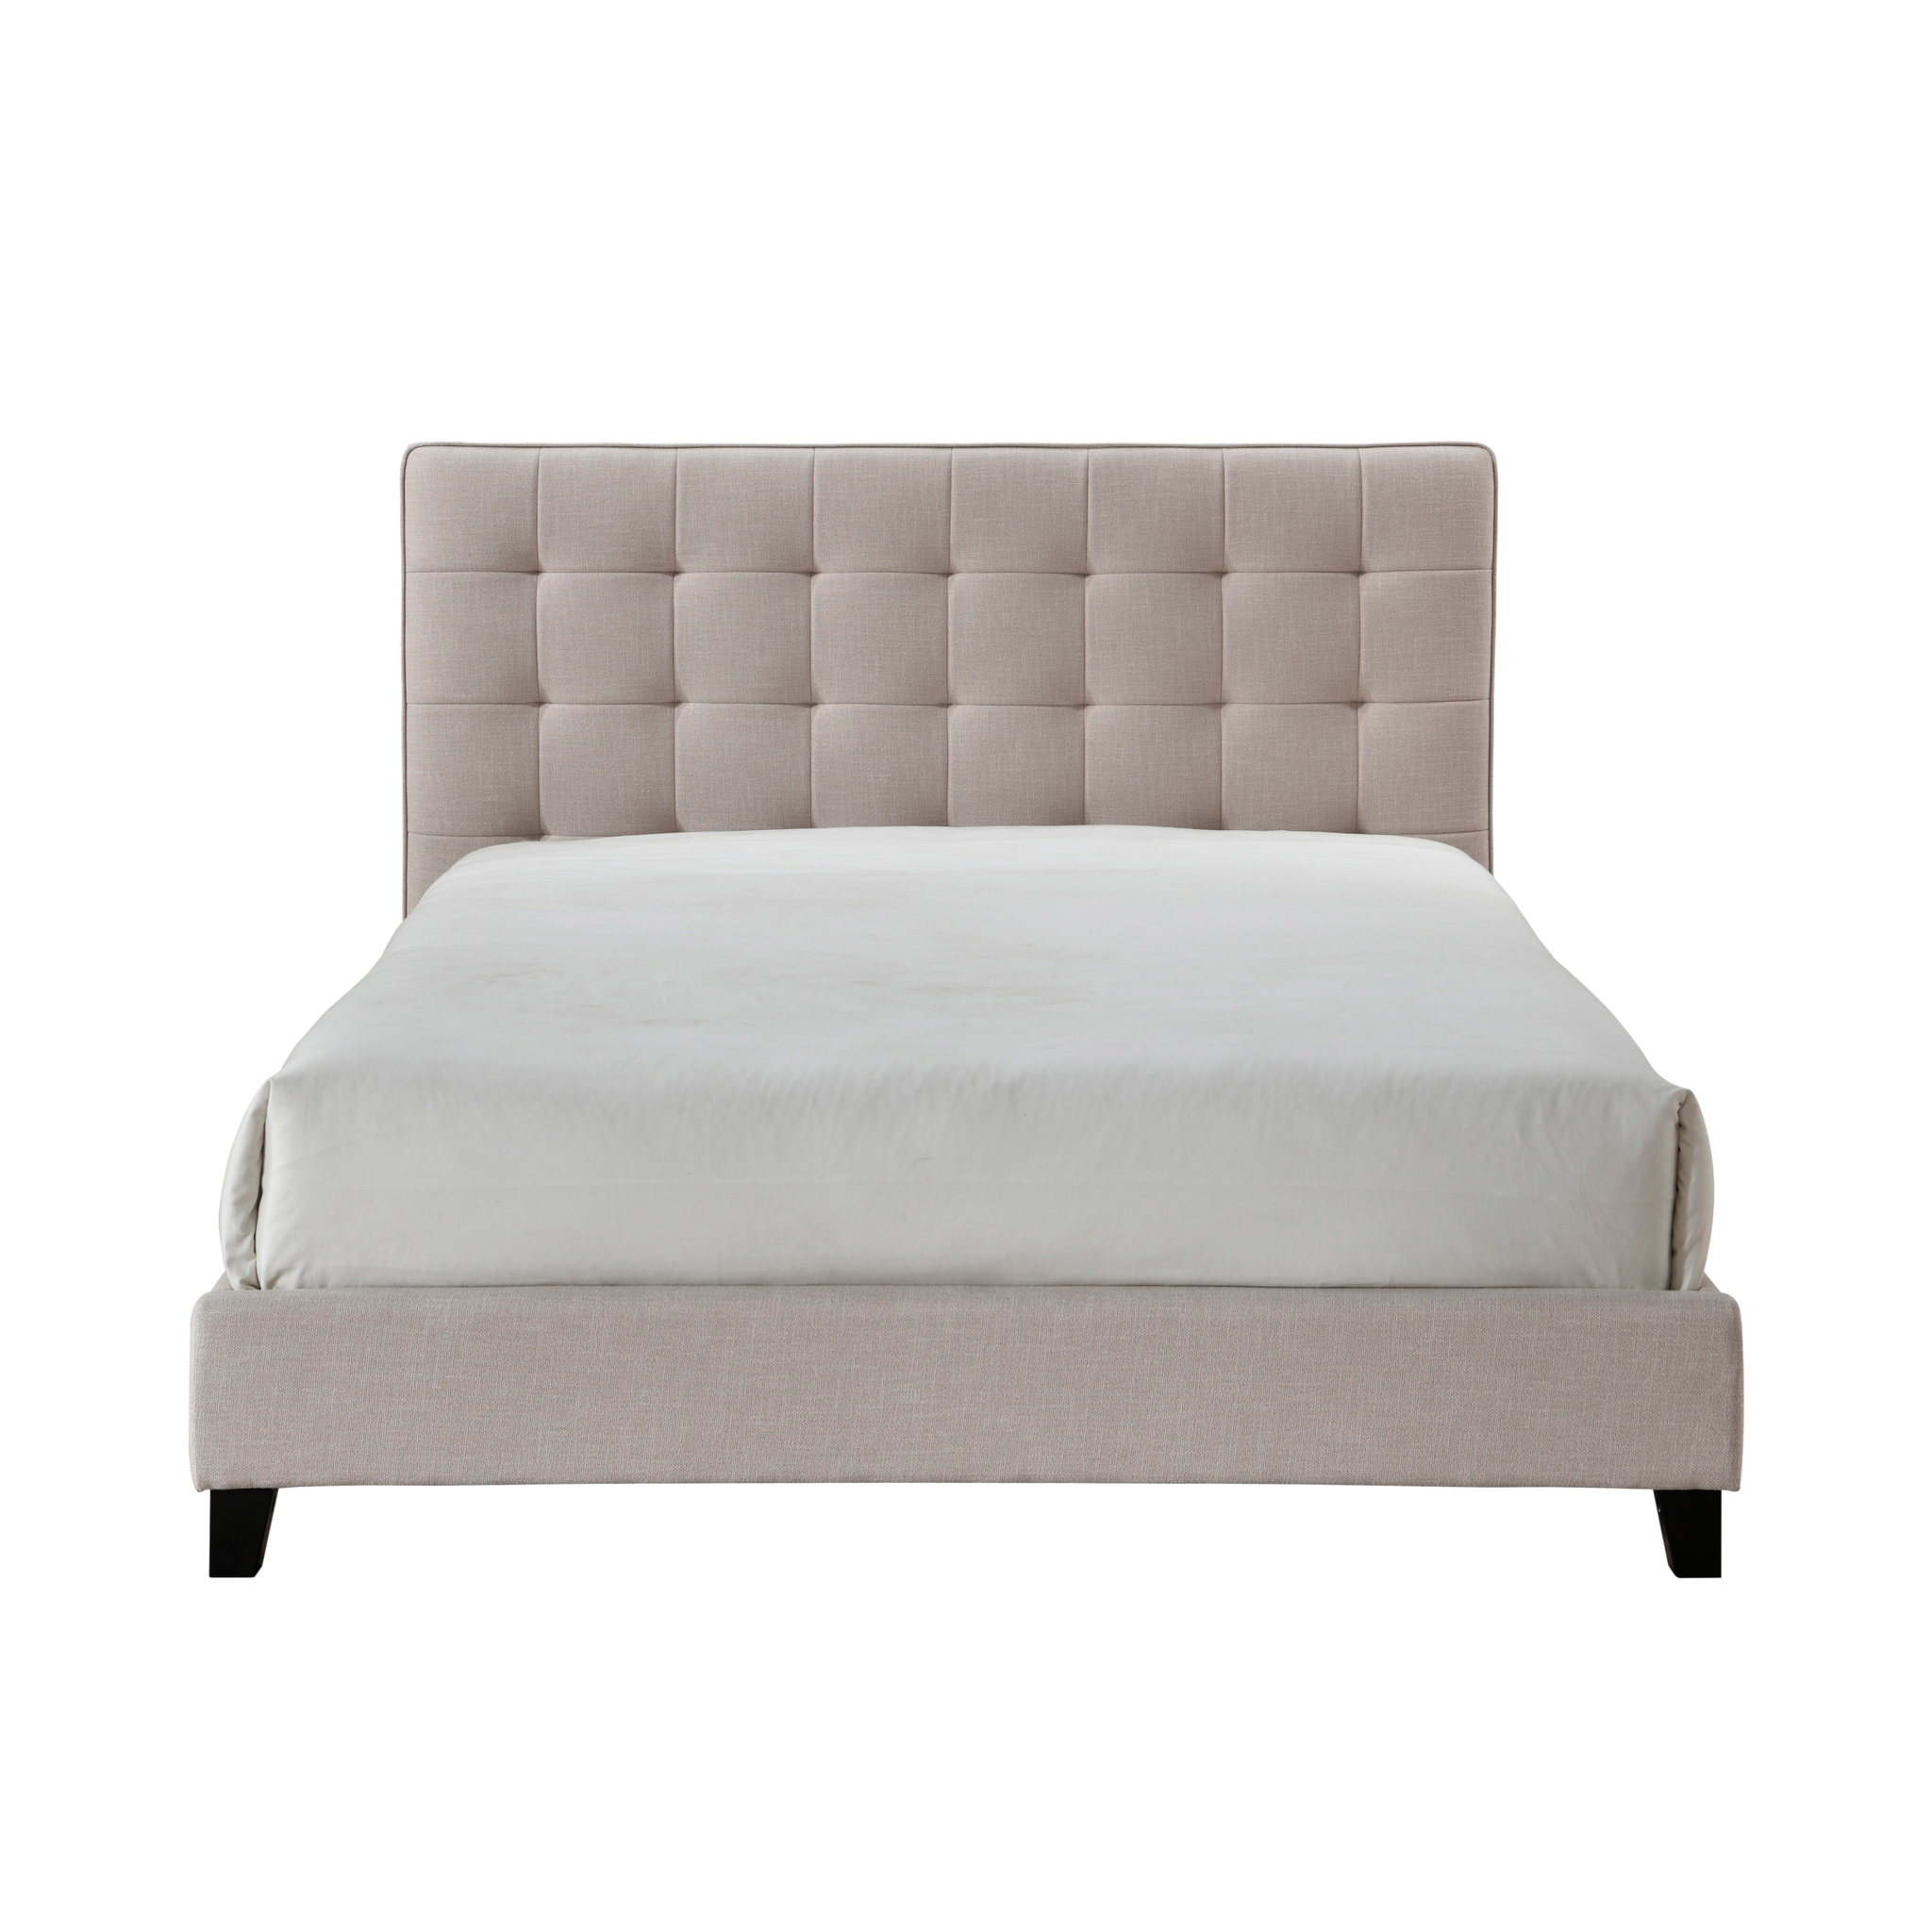 83411 PALISADES Queen size bed